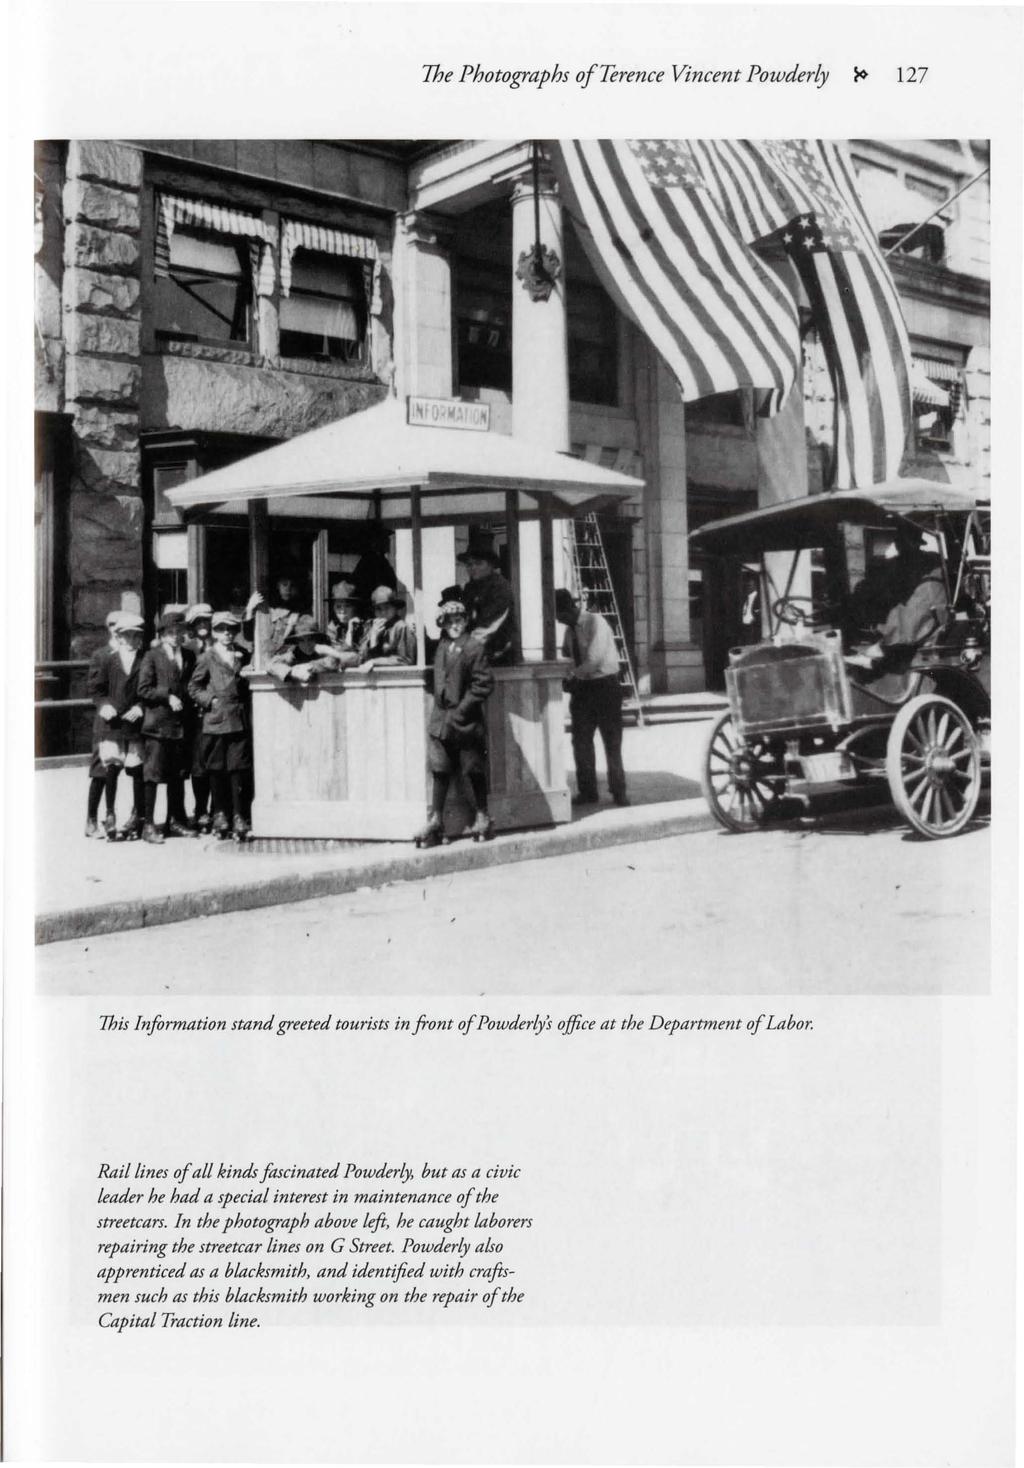 The Photographs o/terence Vincent Powderly ~ 127 1his Information stand greeted tourists in front of Powderly's office at the Department of Labor.